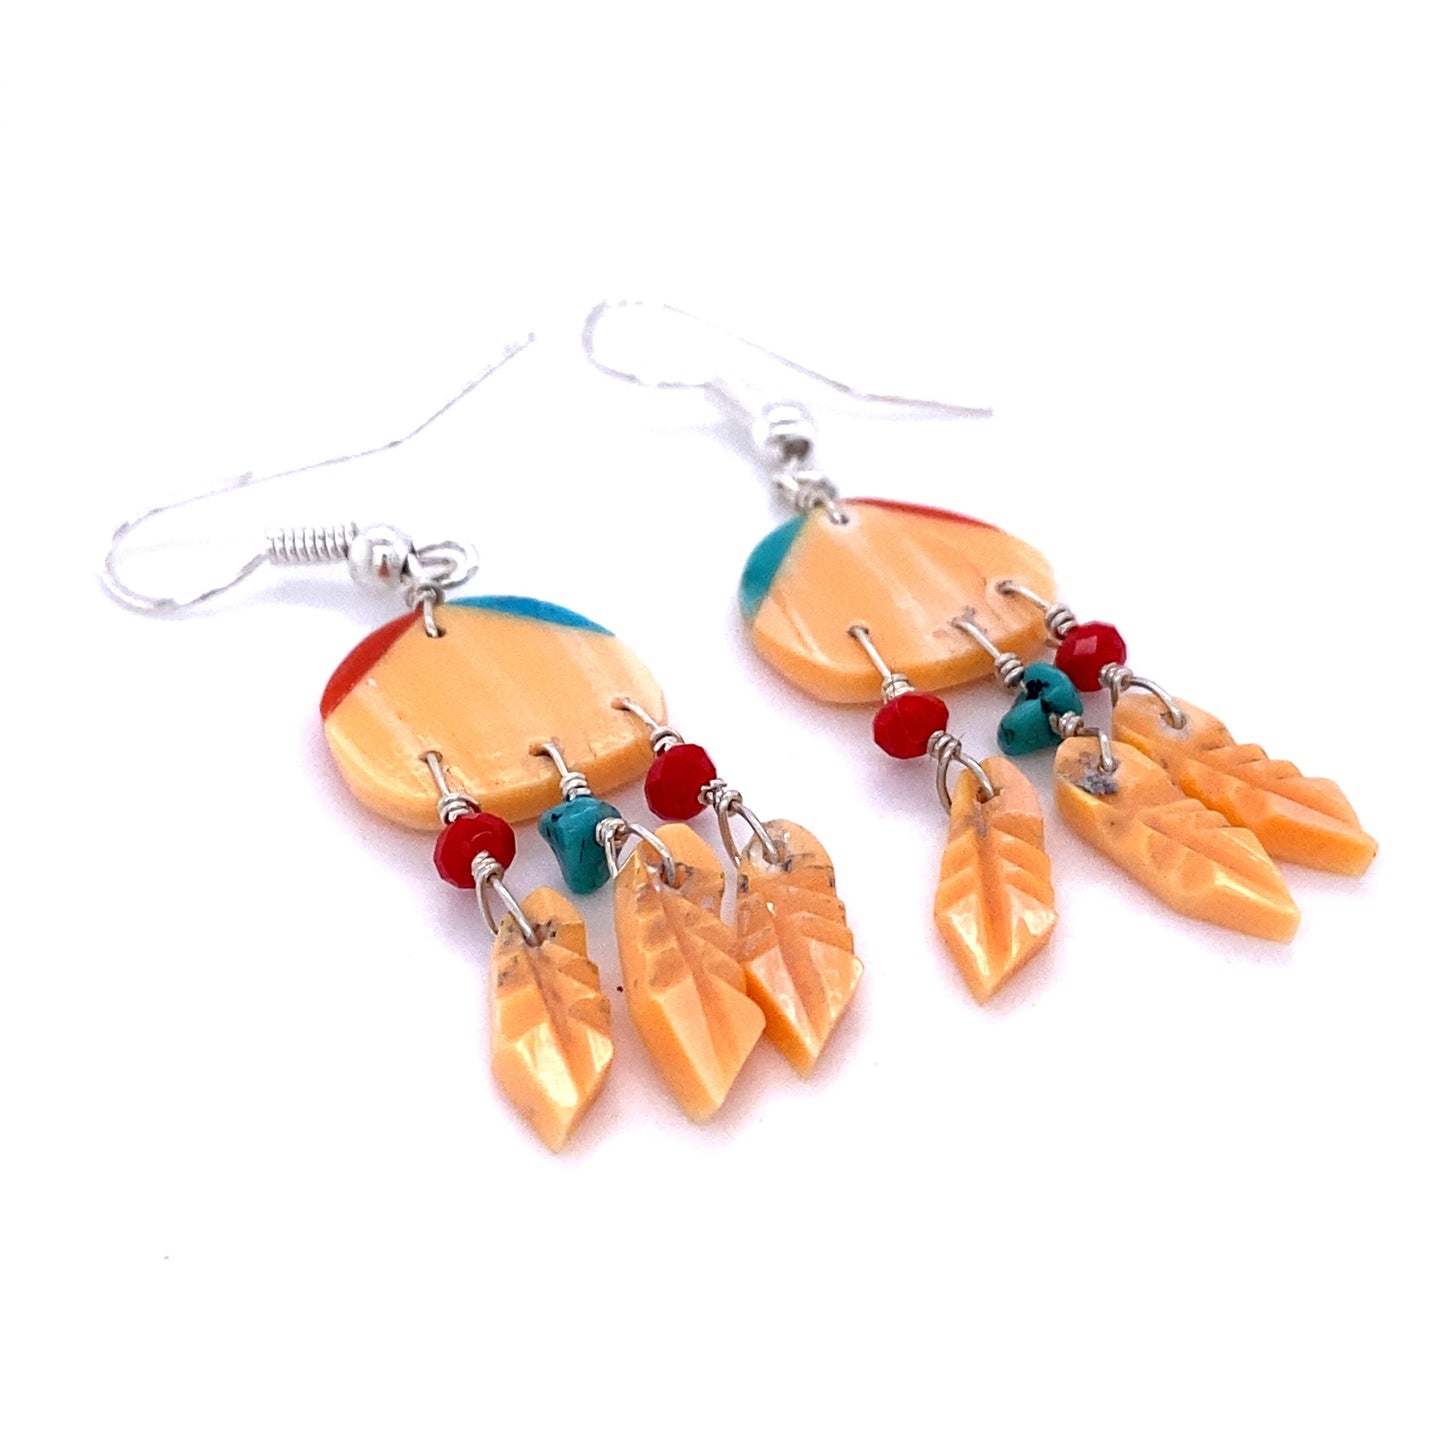 
                  
                    A pair of vibrant Super Silver dream catcher earrings, handcrafted by skilled artisans using inspiration from Native American culture. These unique earrings feature beautiful natural stone accents with 3 Small Stone Feathers.
                  
                